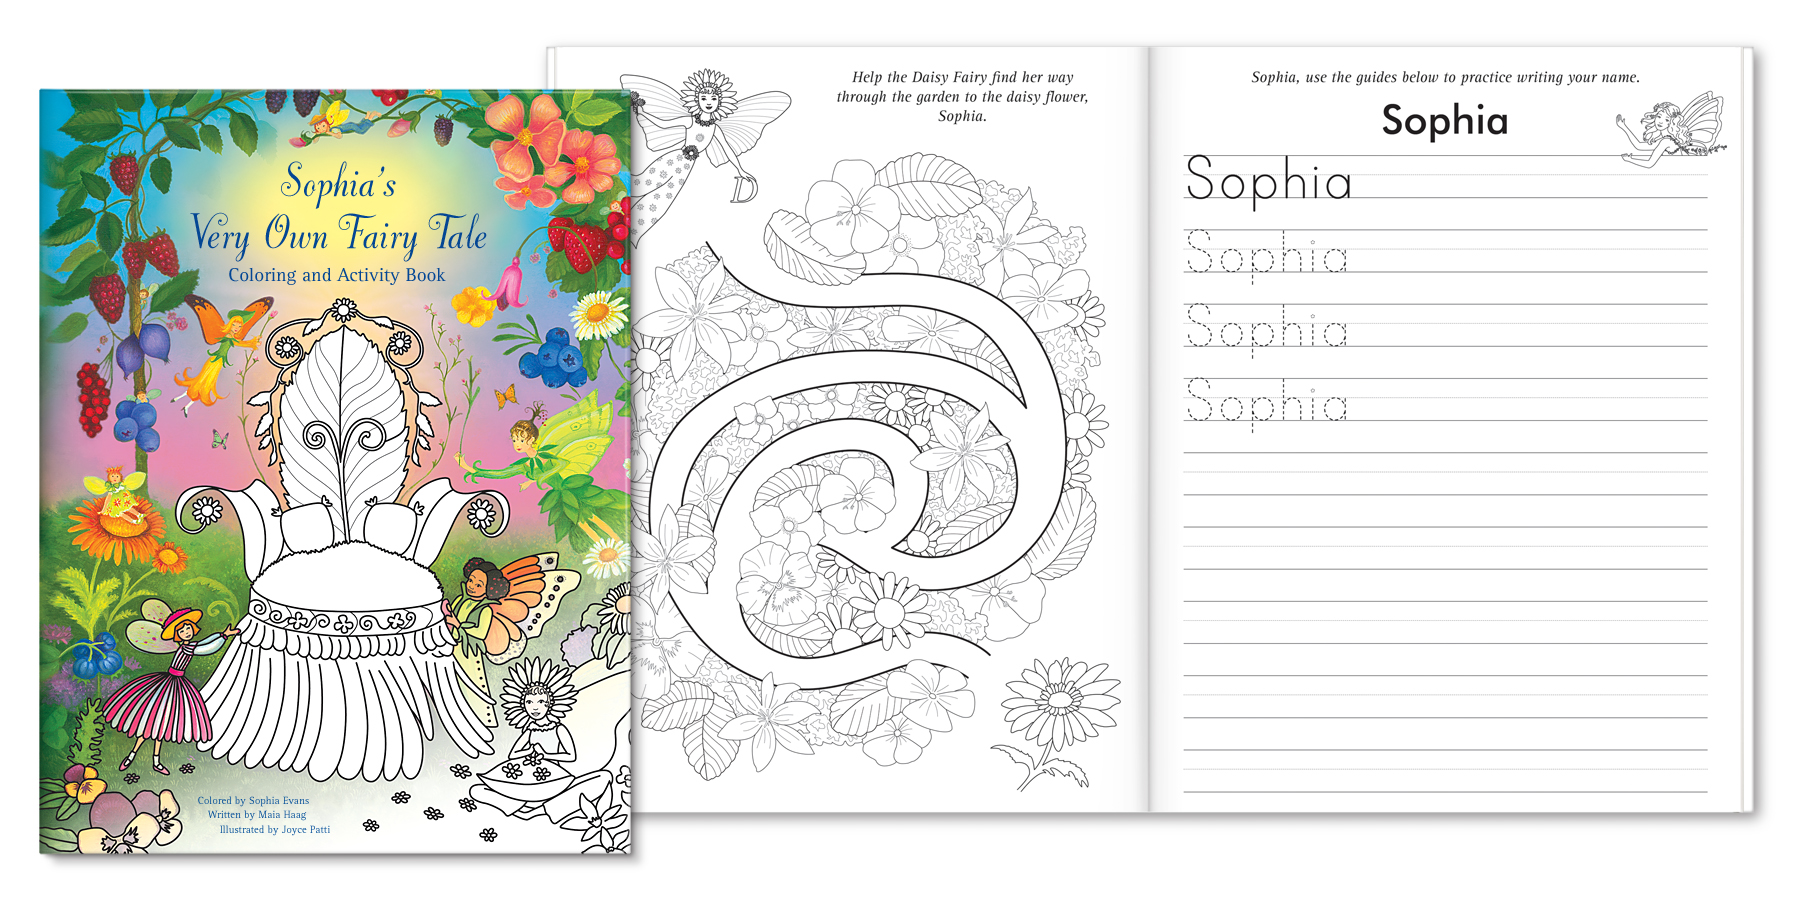 My Very Own Fairy Tale Coloring and Activity Book